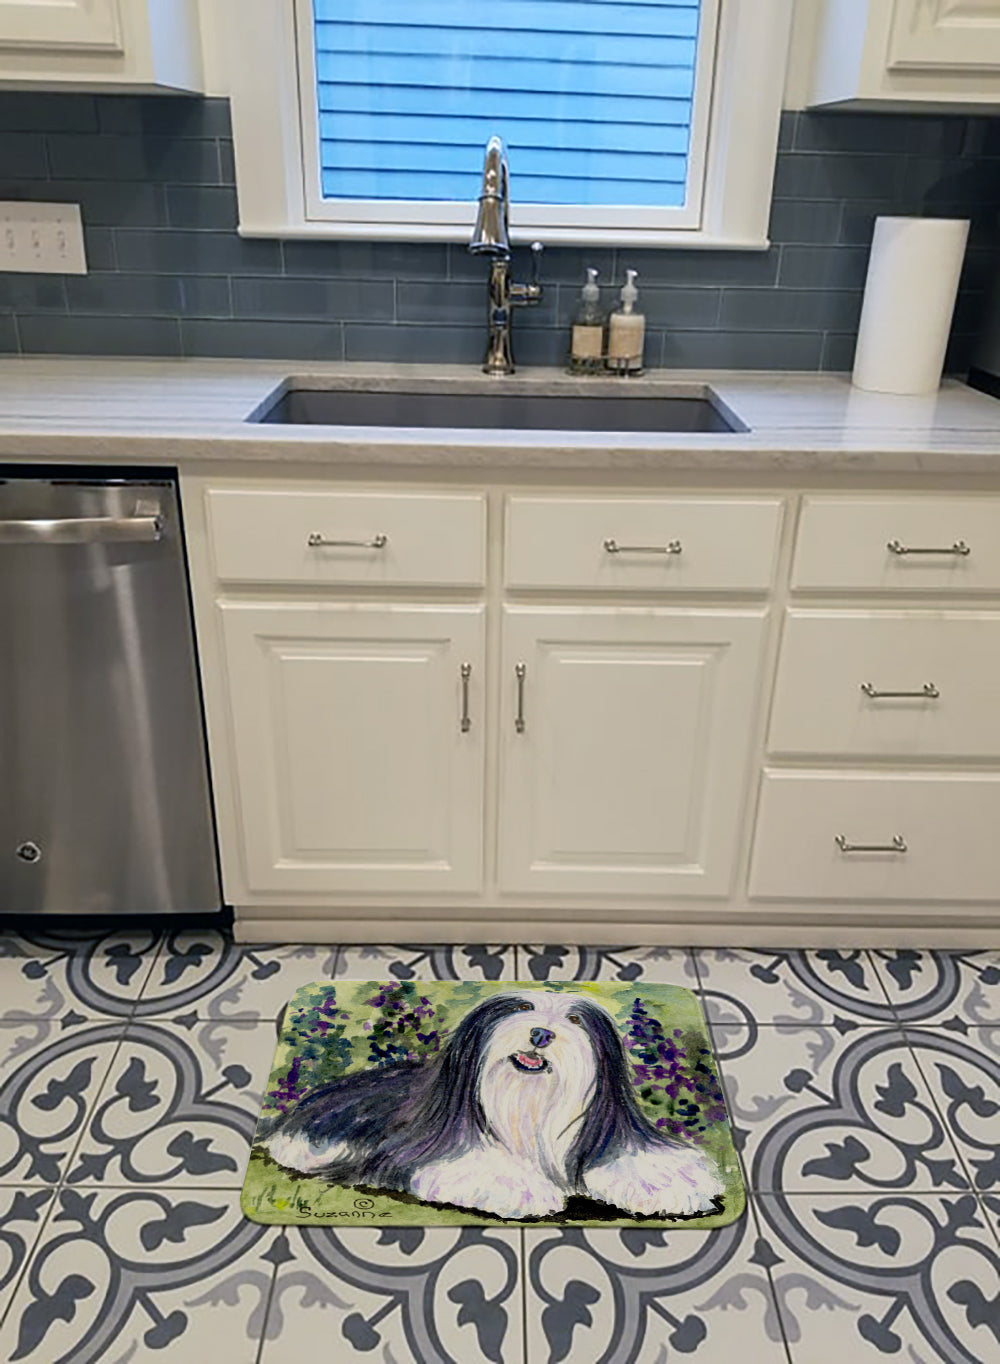 Bearded Collie Machine Washable Memory Foam Mat SS8816RUG - the-store.com